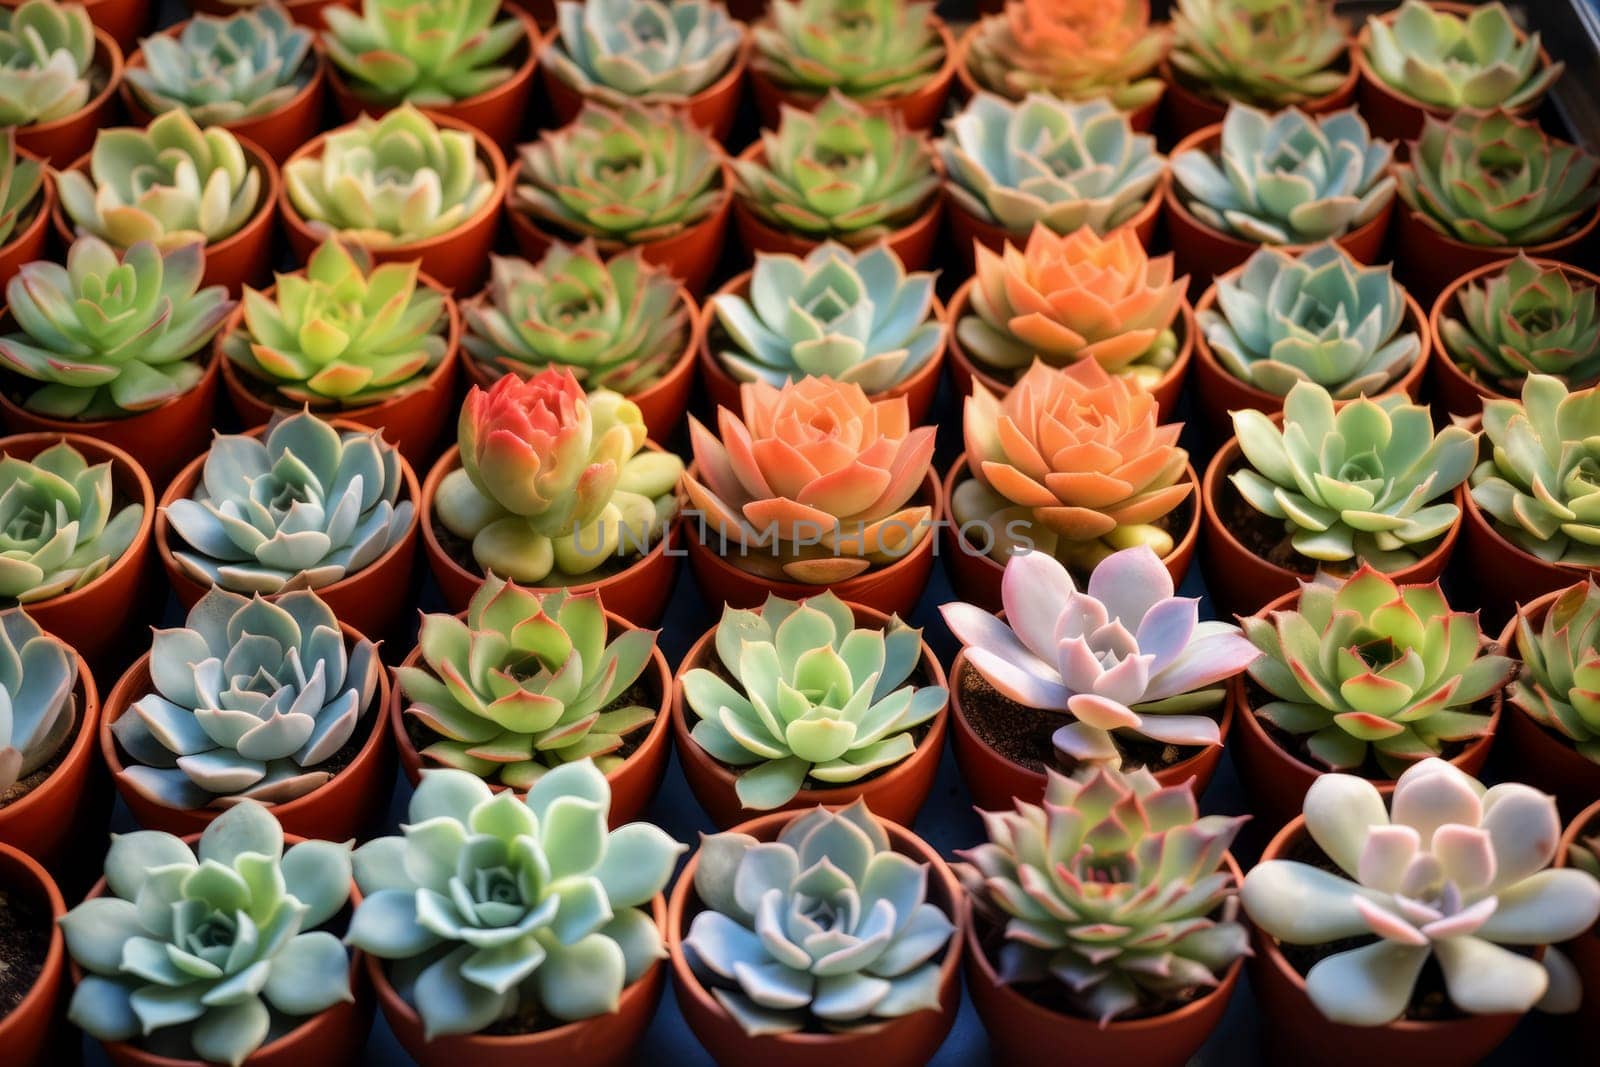 succulents in a greenhouse in clay pots are arranged in rows on a wooden surface